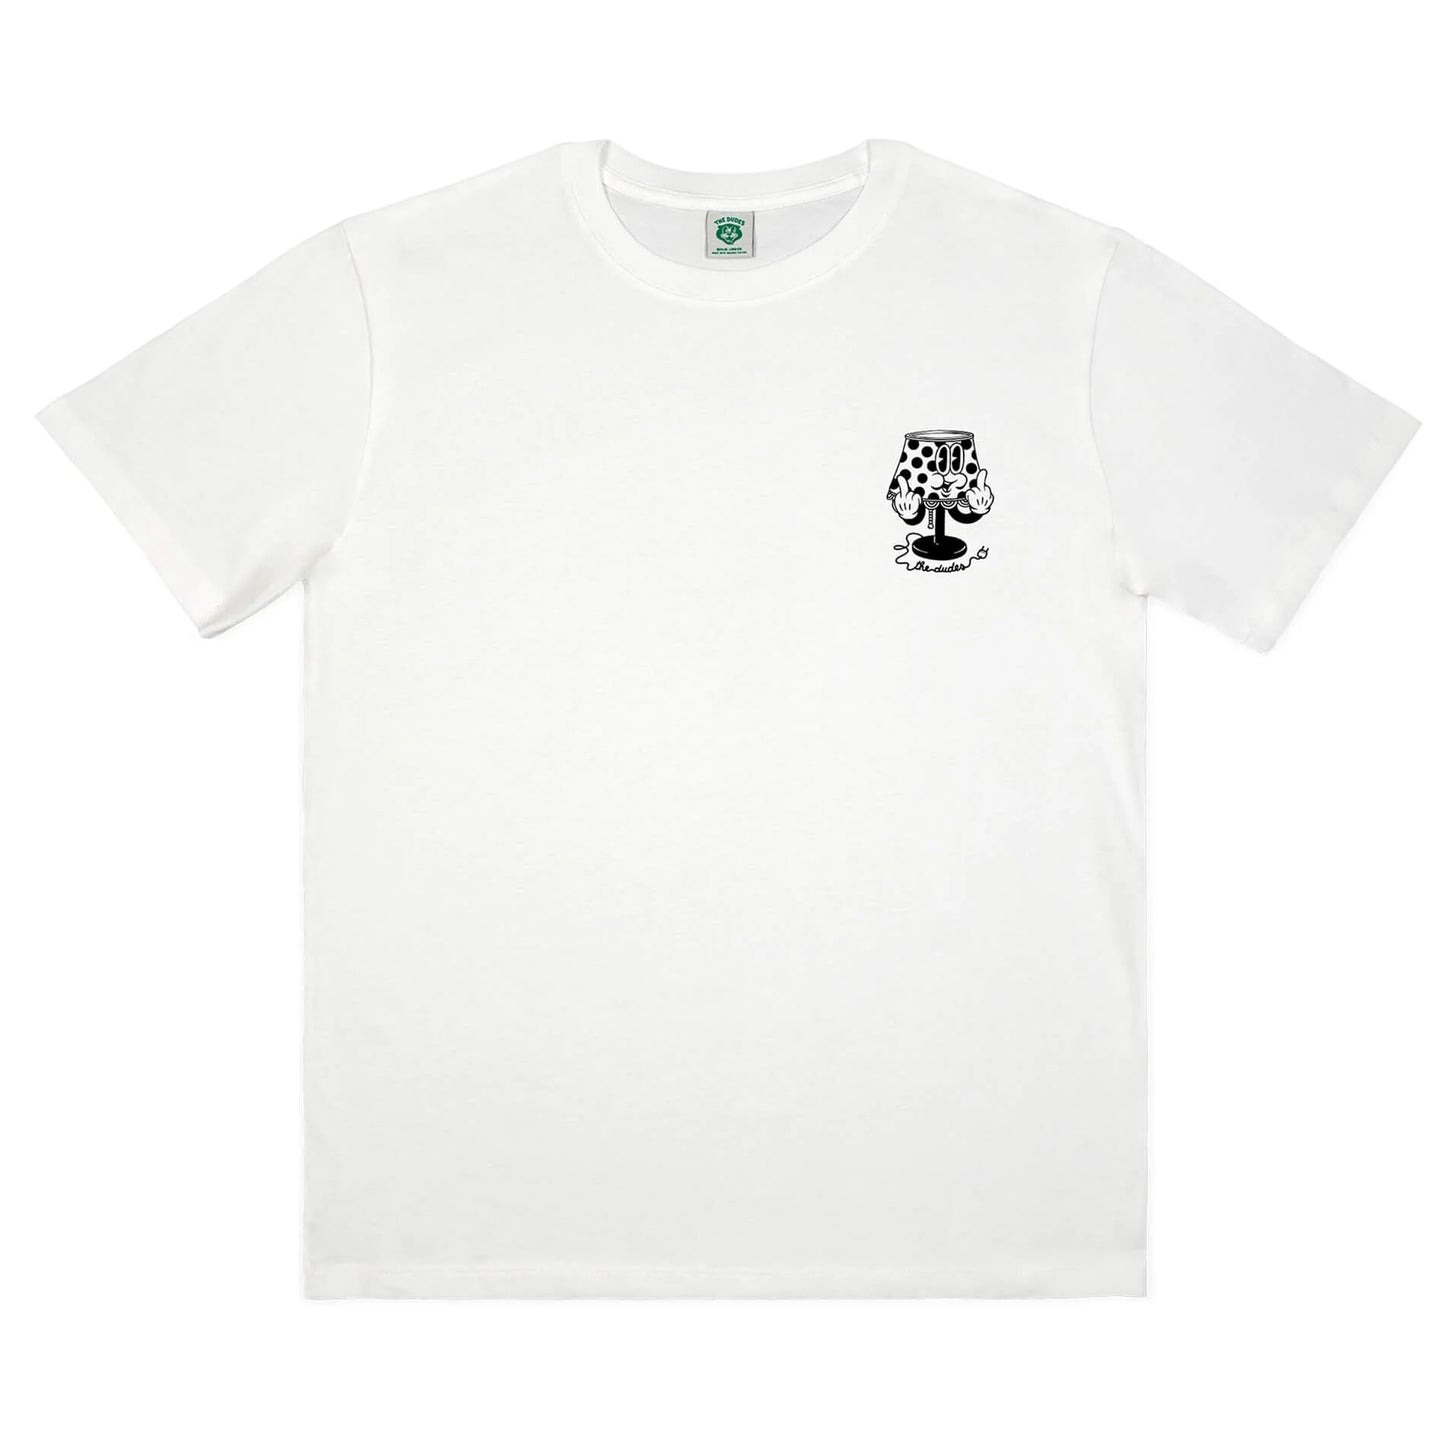 THE DUDES - ACHIEVE NOTHING TEE - OFF WHITE